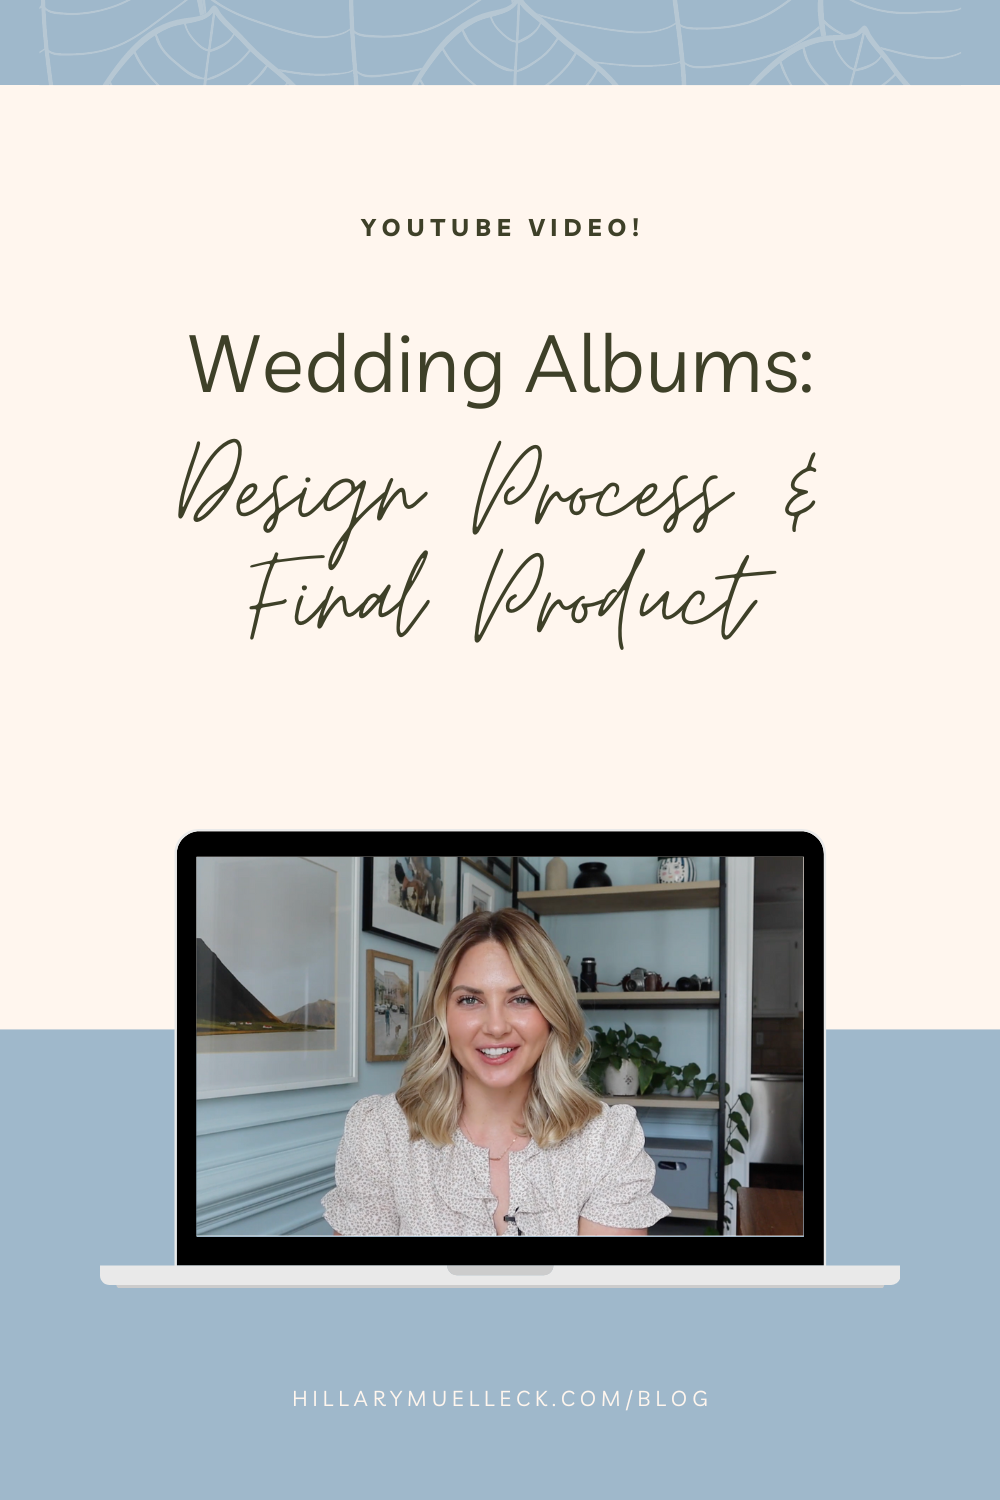 Wedding albums from Miller's: my design process and the final product designed by NC wedding photographer Hillary Muelleck